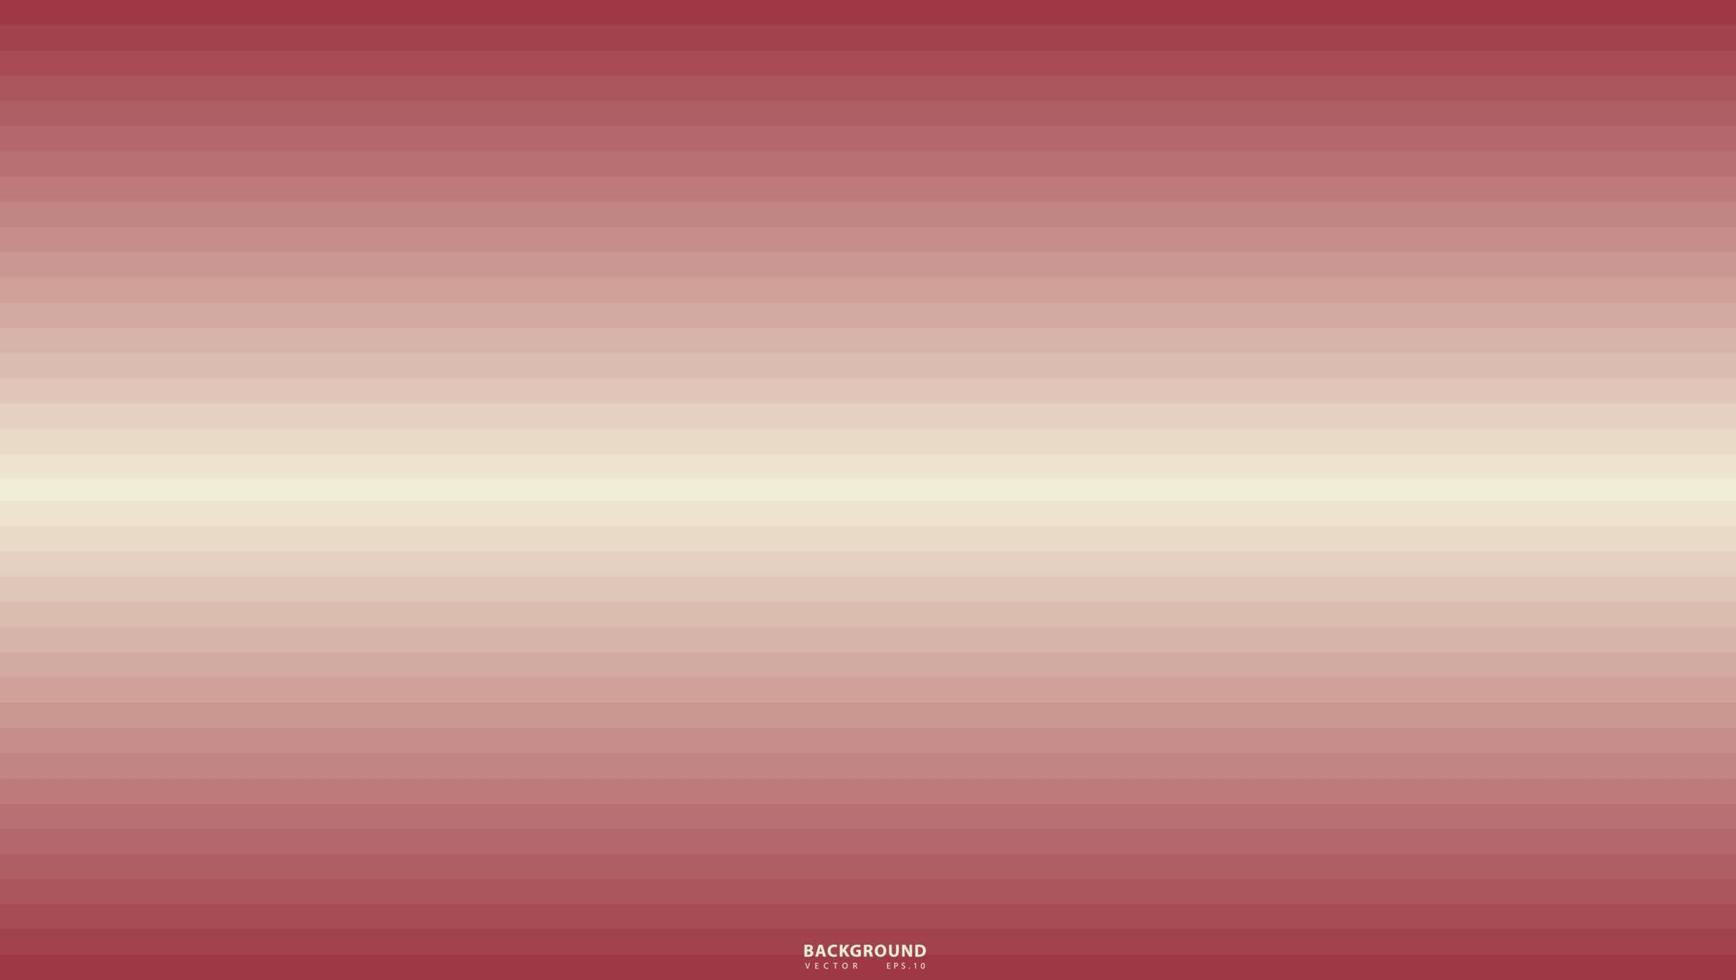 Vector red blurred gradient style background. Abstract color smooth, web design, greeting card. Technology background, Eps 10 vector illustration